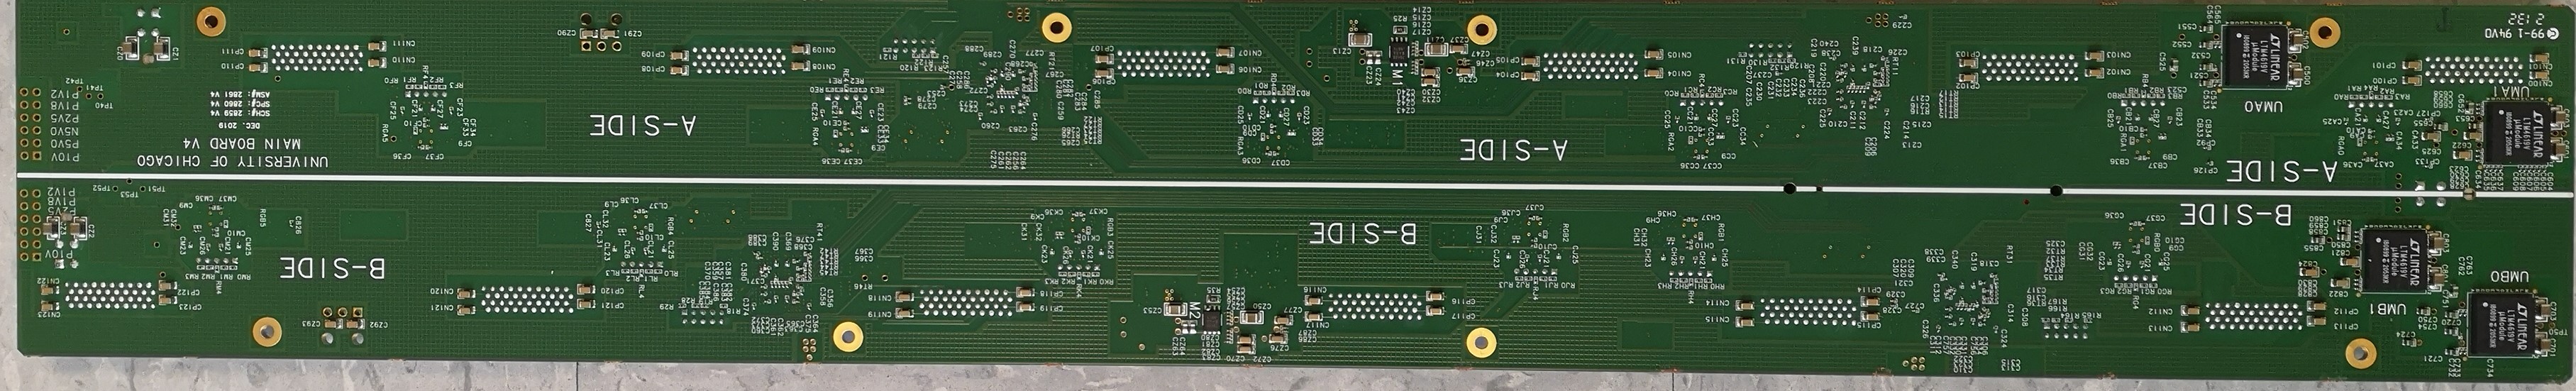 Picture of bottom of MBV4 board